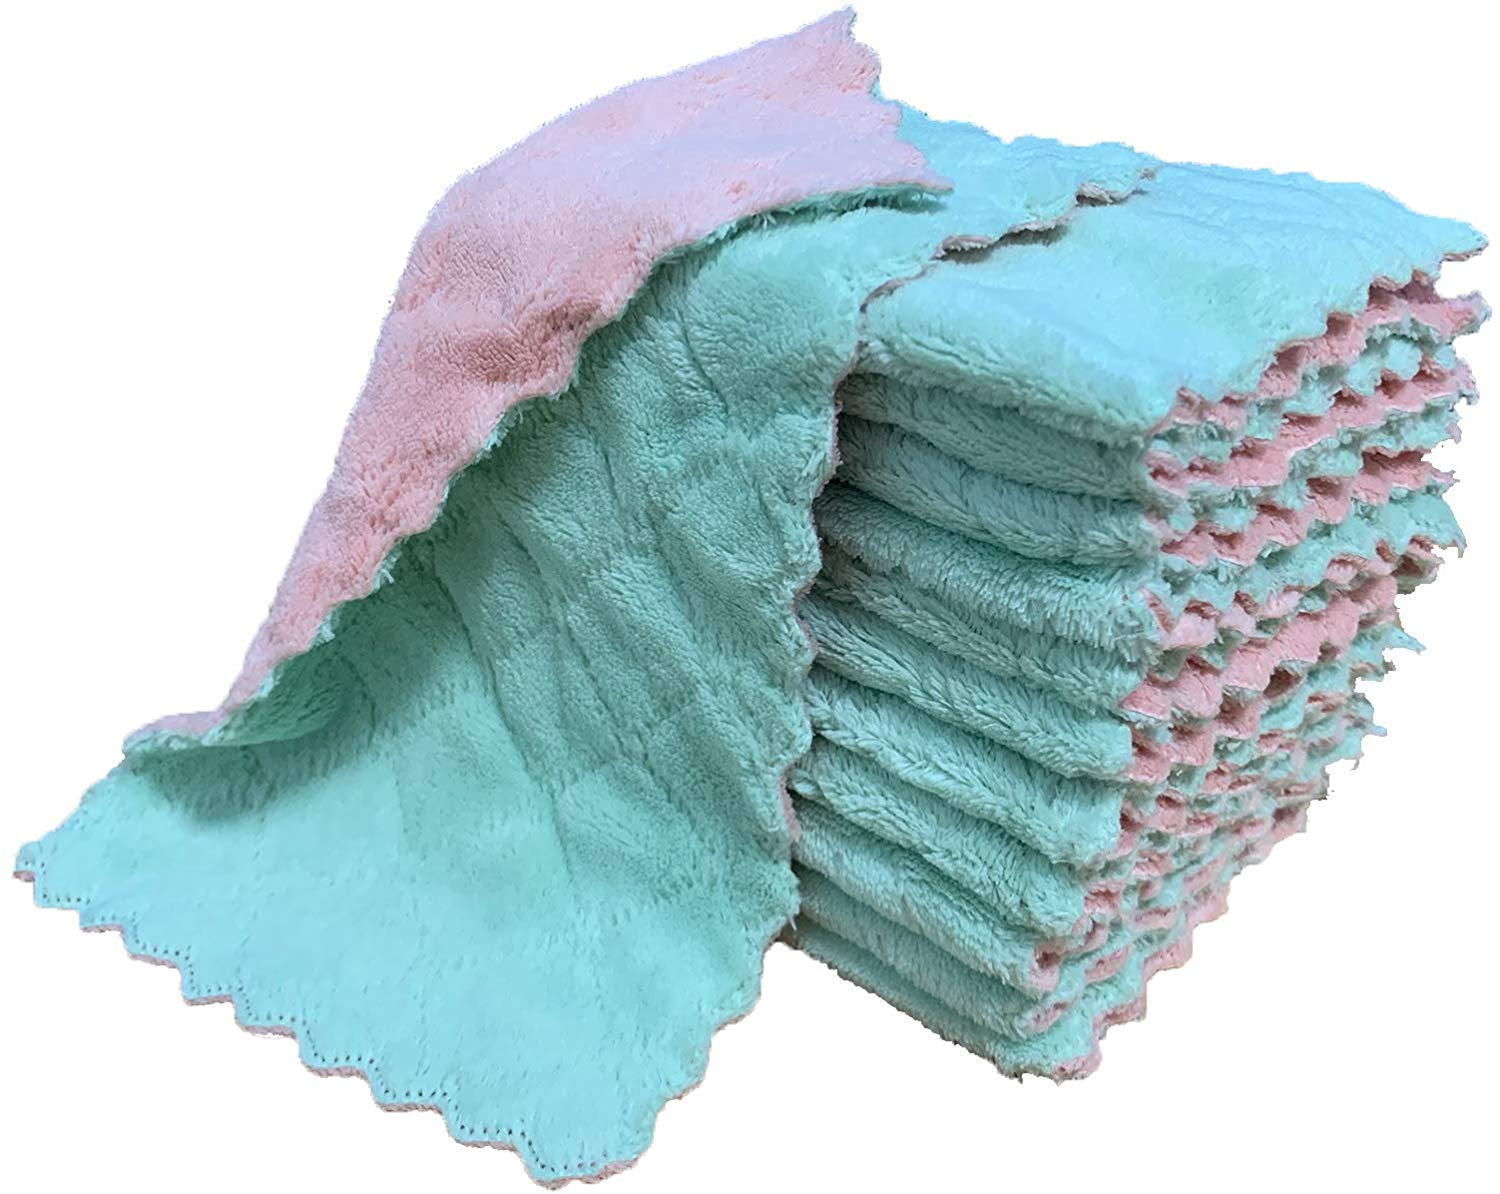 Super Absorbent Coral Velvet Dishtowels Nonstick oil Washable Fast Drying microfiber polishing cleaning Towels